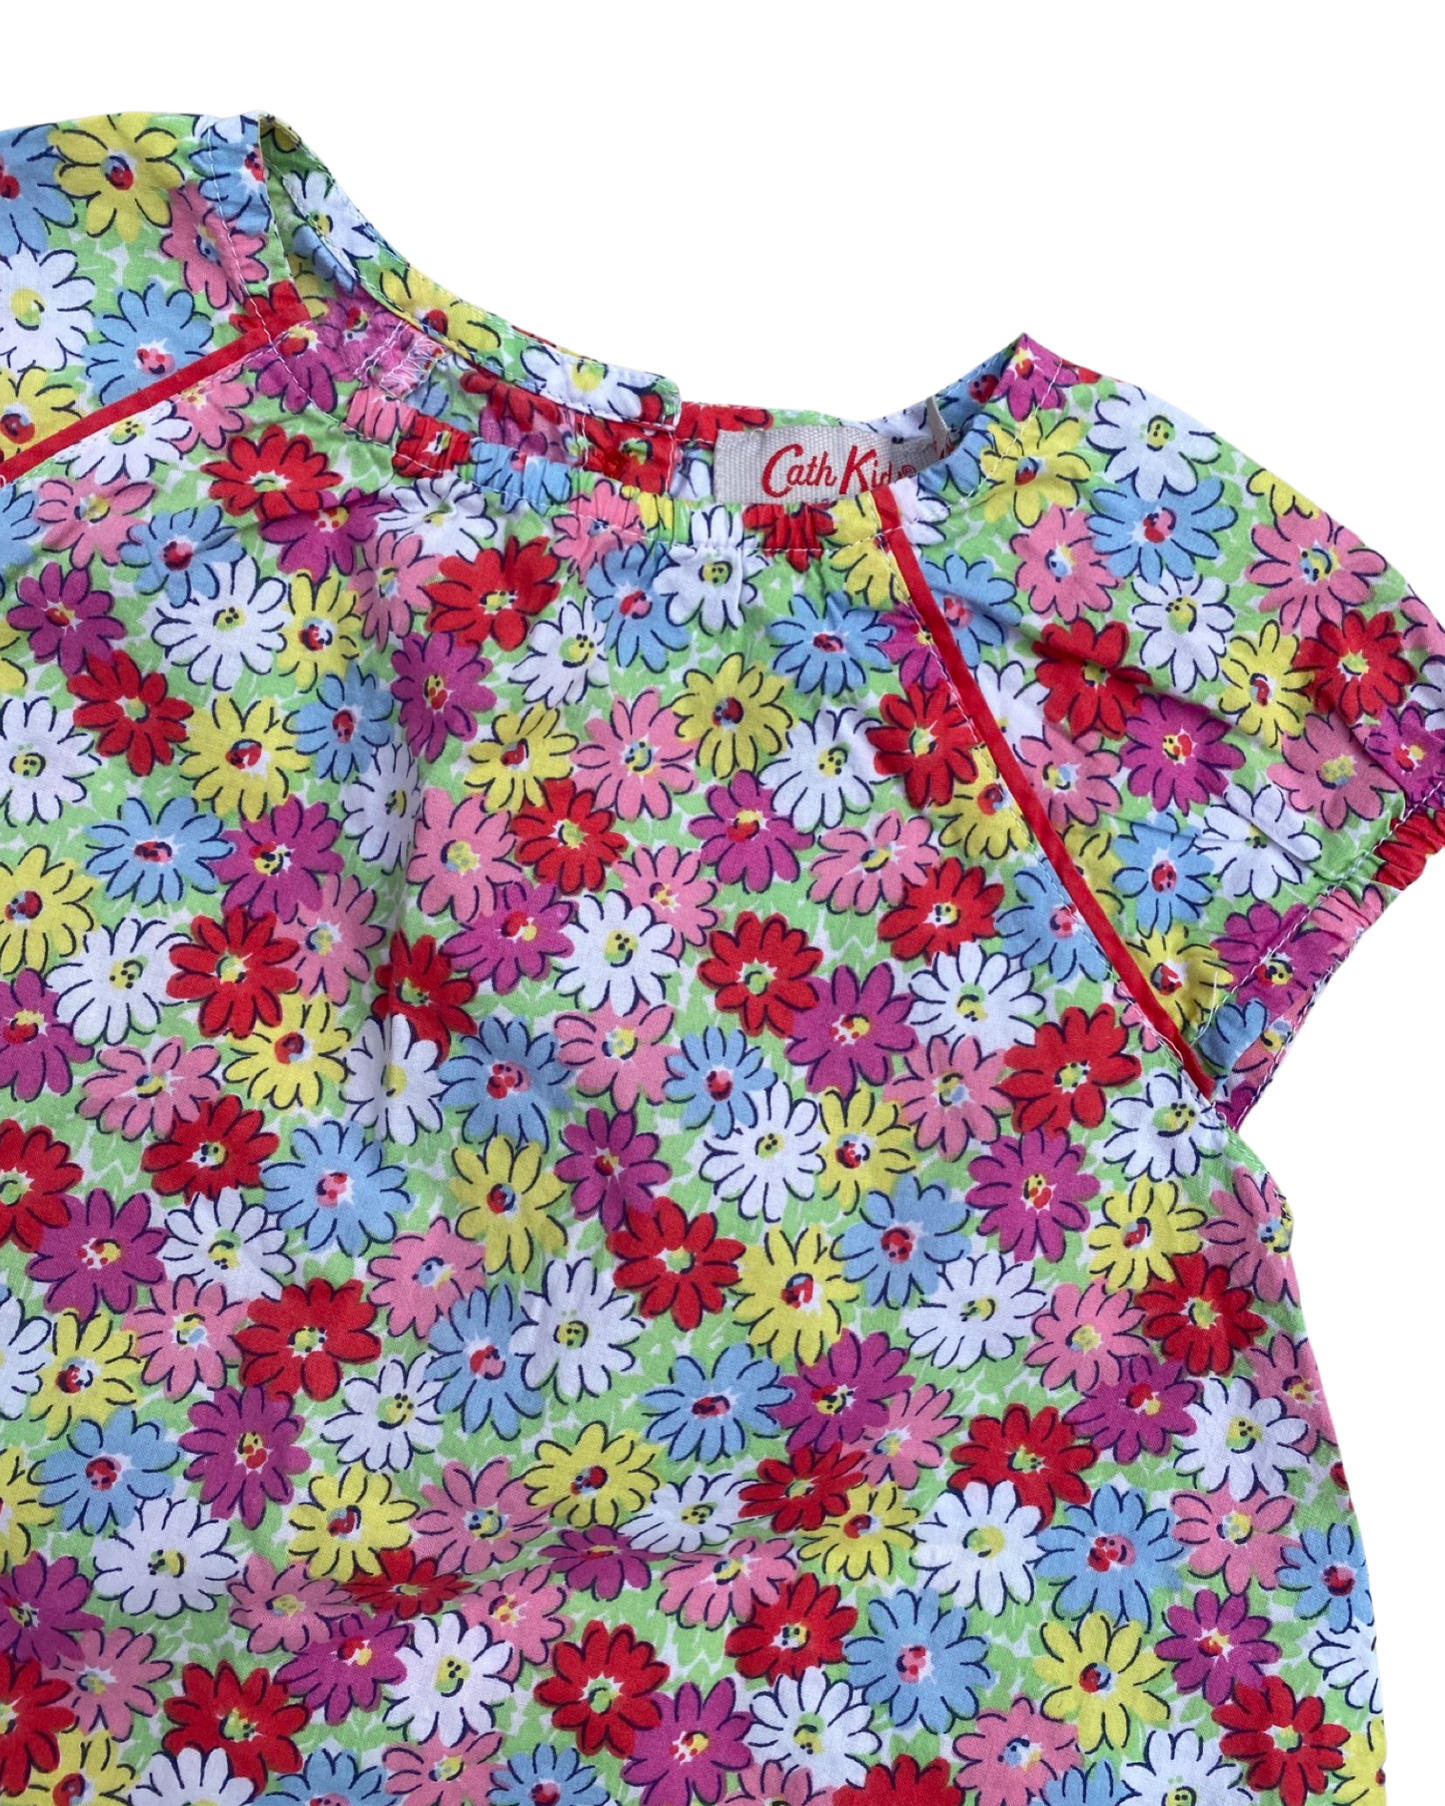 Cath Kitson floral print dress with matching nappy cover (9-12mths)